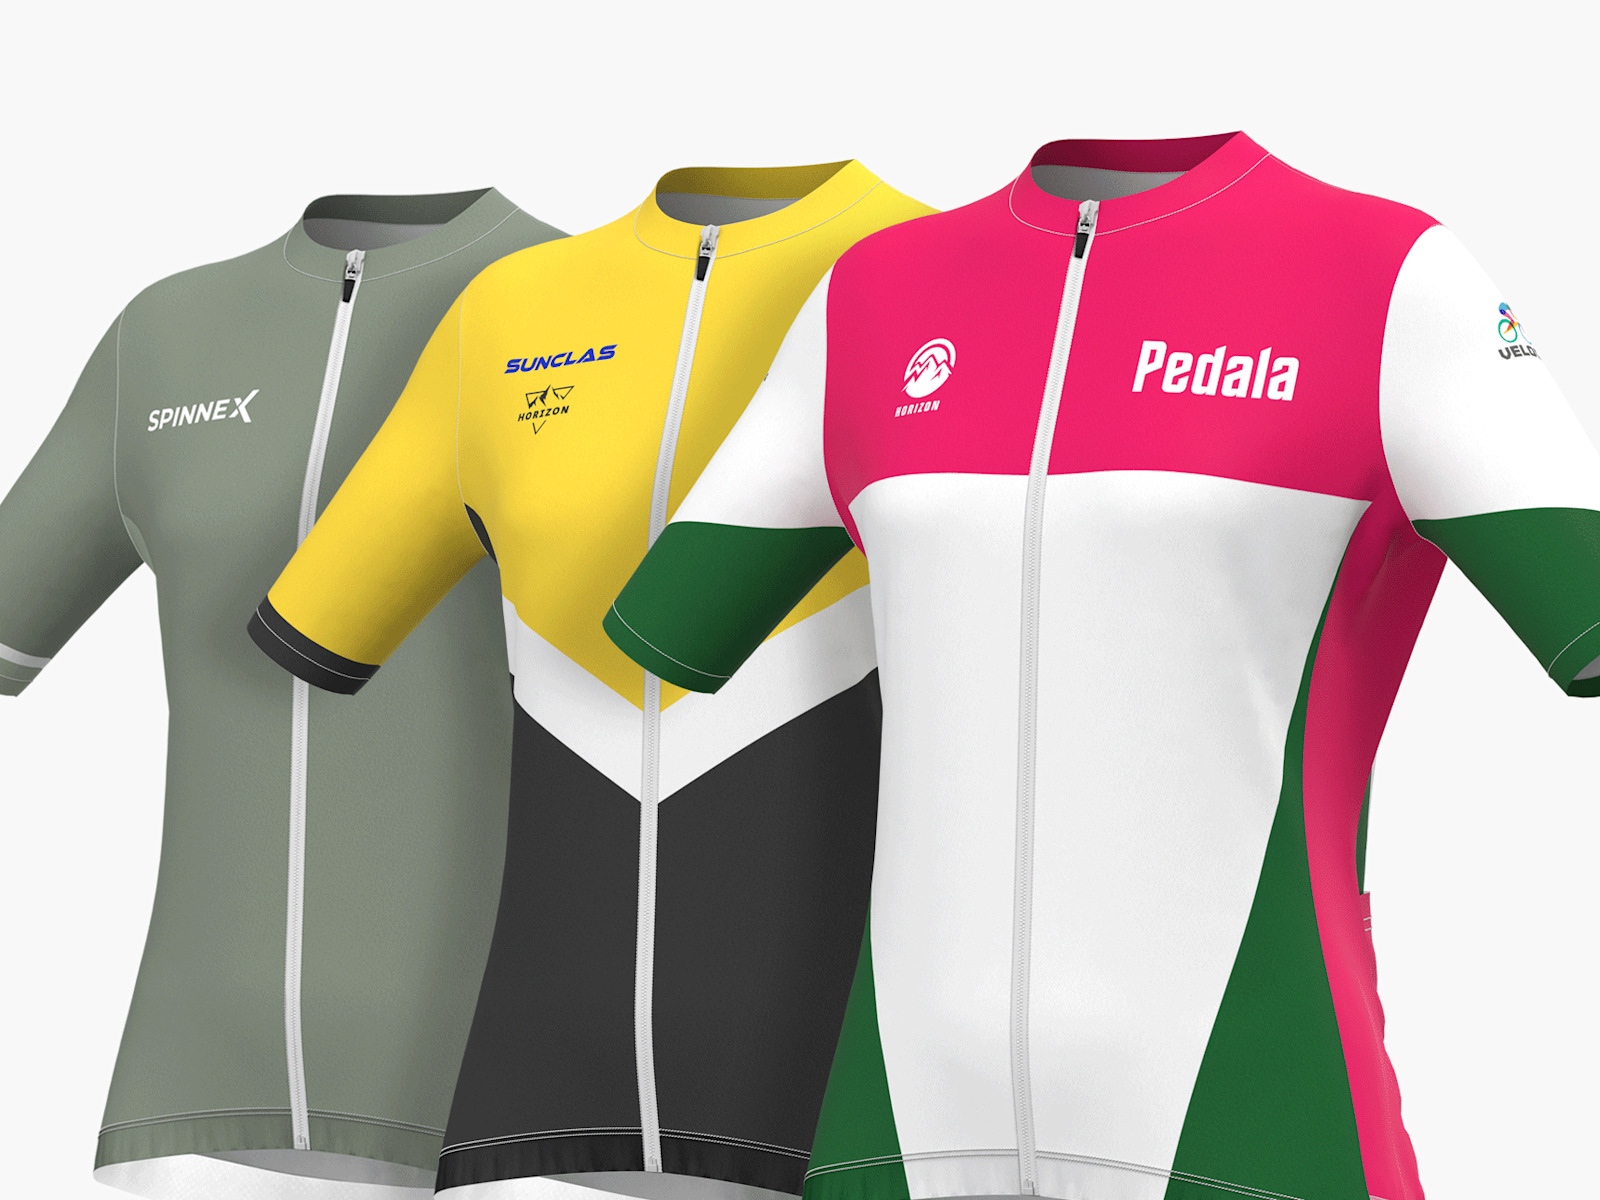 Three different patterns for full custom women’s cycling jerseys promoting three cycling businesses with design details on the front.